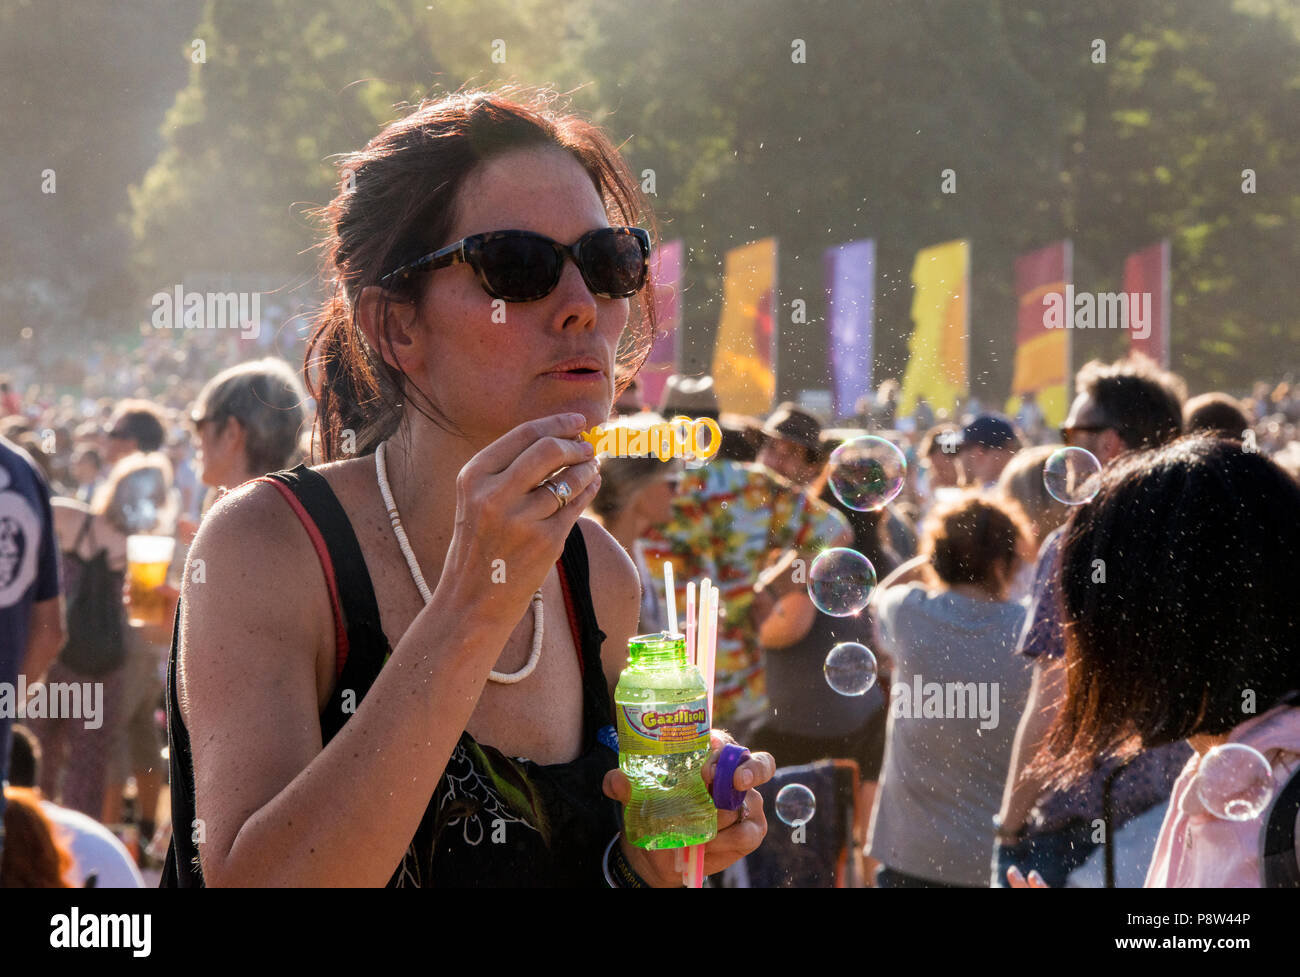 Female festival goer enjoying the music, and blowing bubbles at the Obelisk Stage at Latitude Festival, Henham Park, Suffolk, England, 13 July 2018. Stock Photo